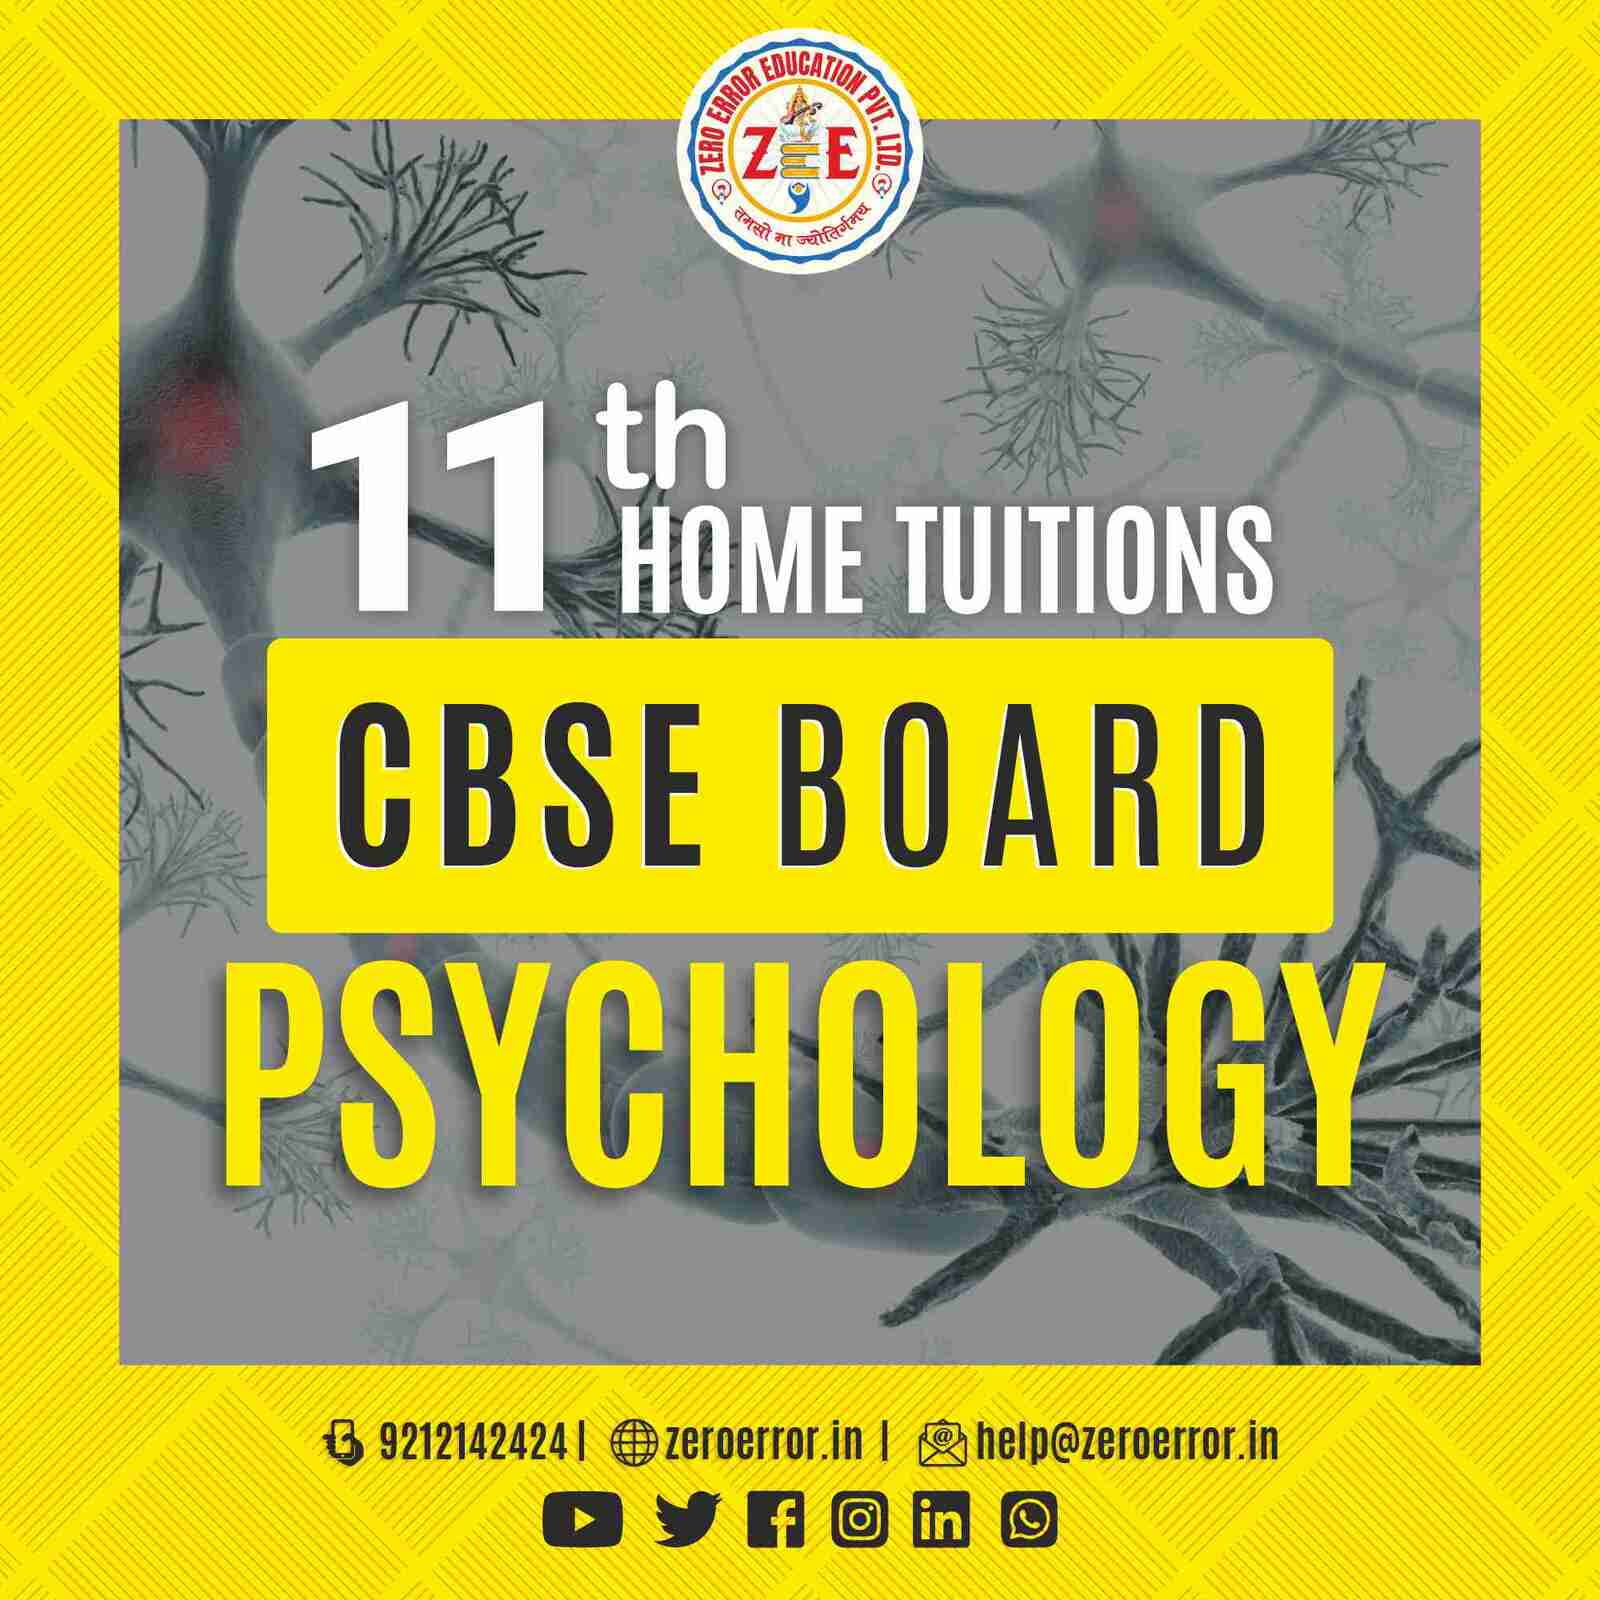 11th Grade CBSE Psychology Online Classes by Zero Error Education Prepare for your CBSE board exams with online and offline Psychology classes for 11th grade. Learn from experienced home tutors and get all the help you need to succeed. Enroll today at Zero Error Education. [https://zeroerror.in/] Call 9212142424 for more information.